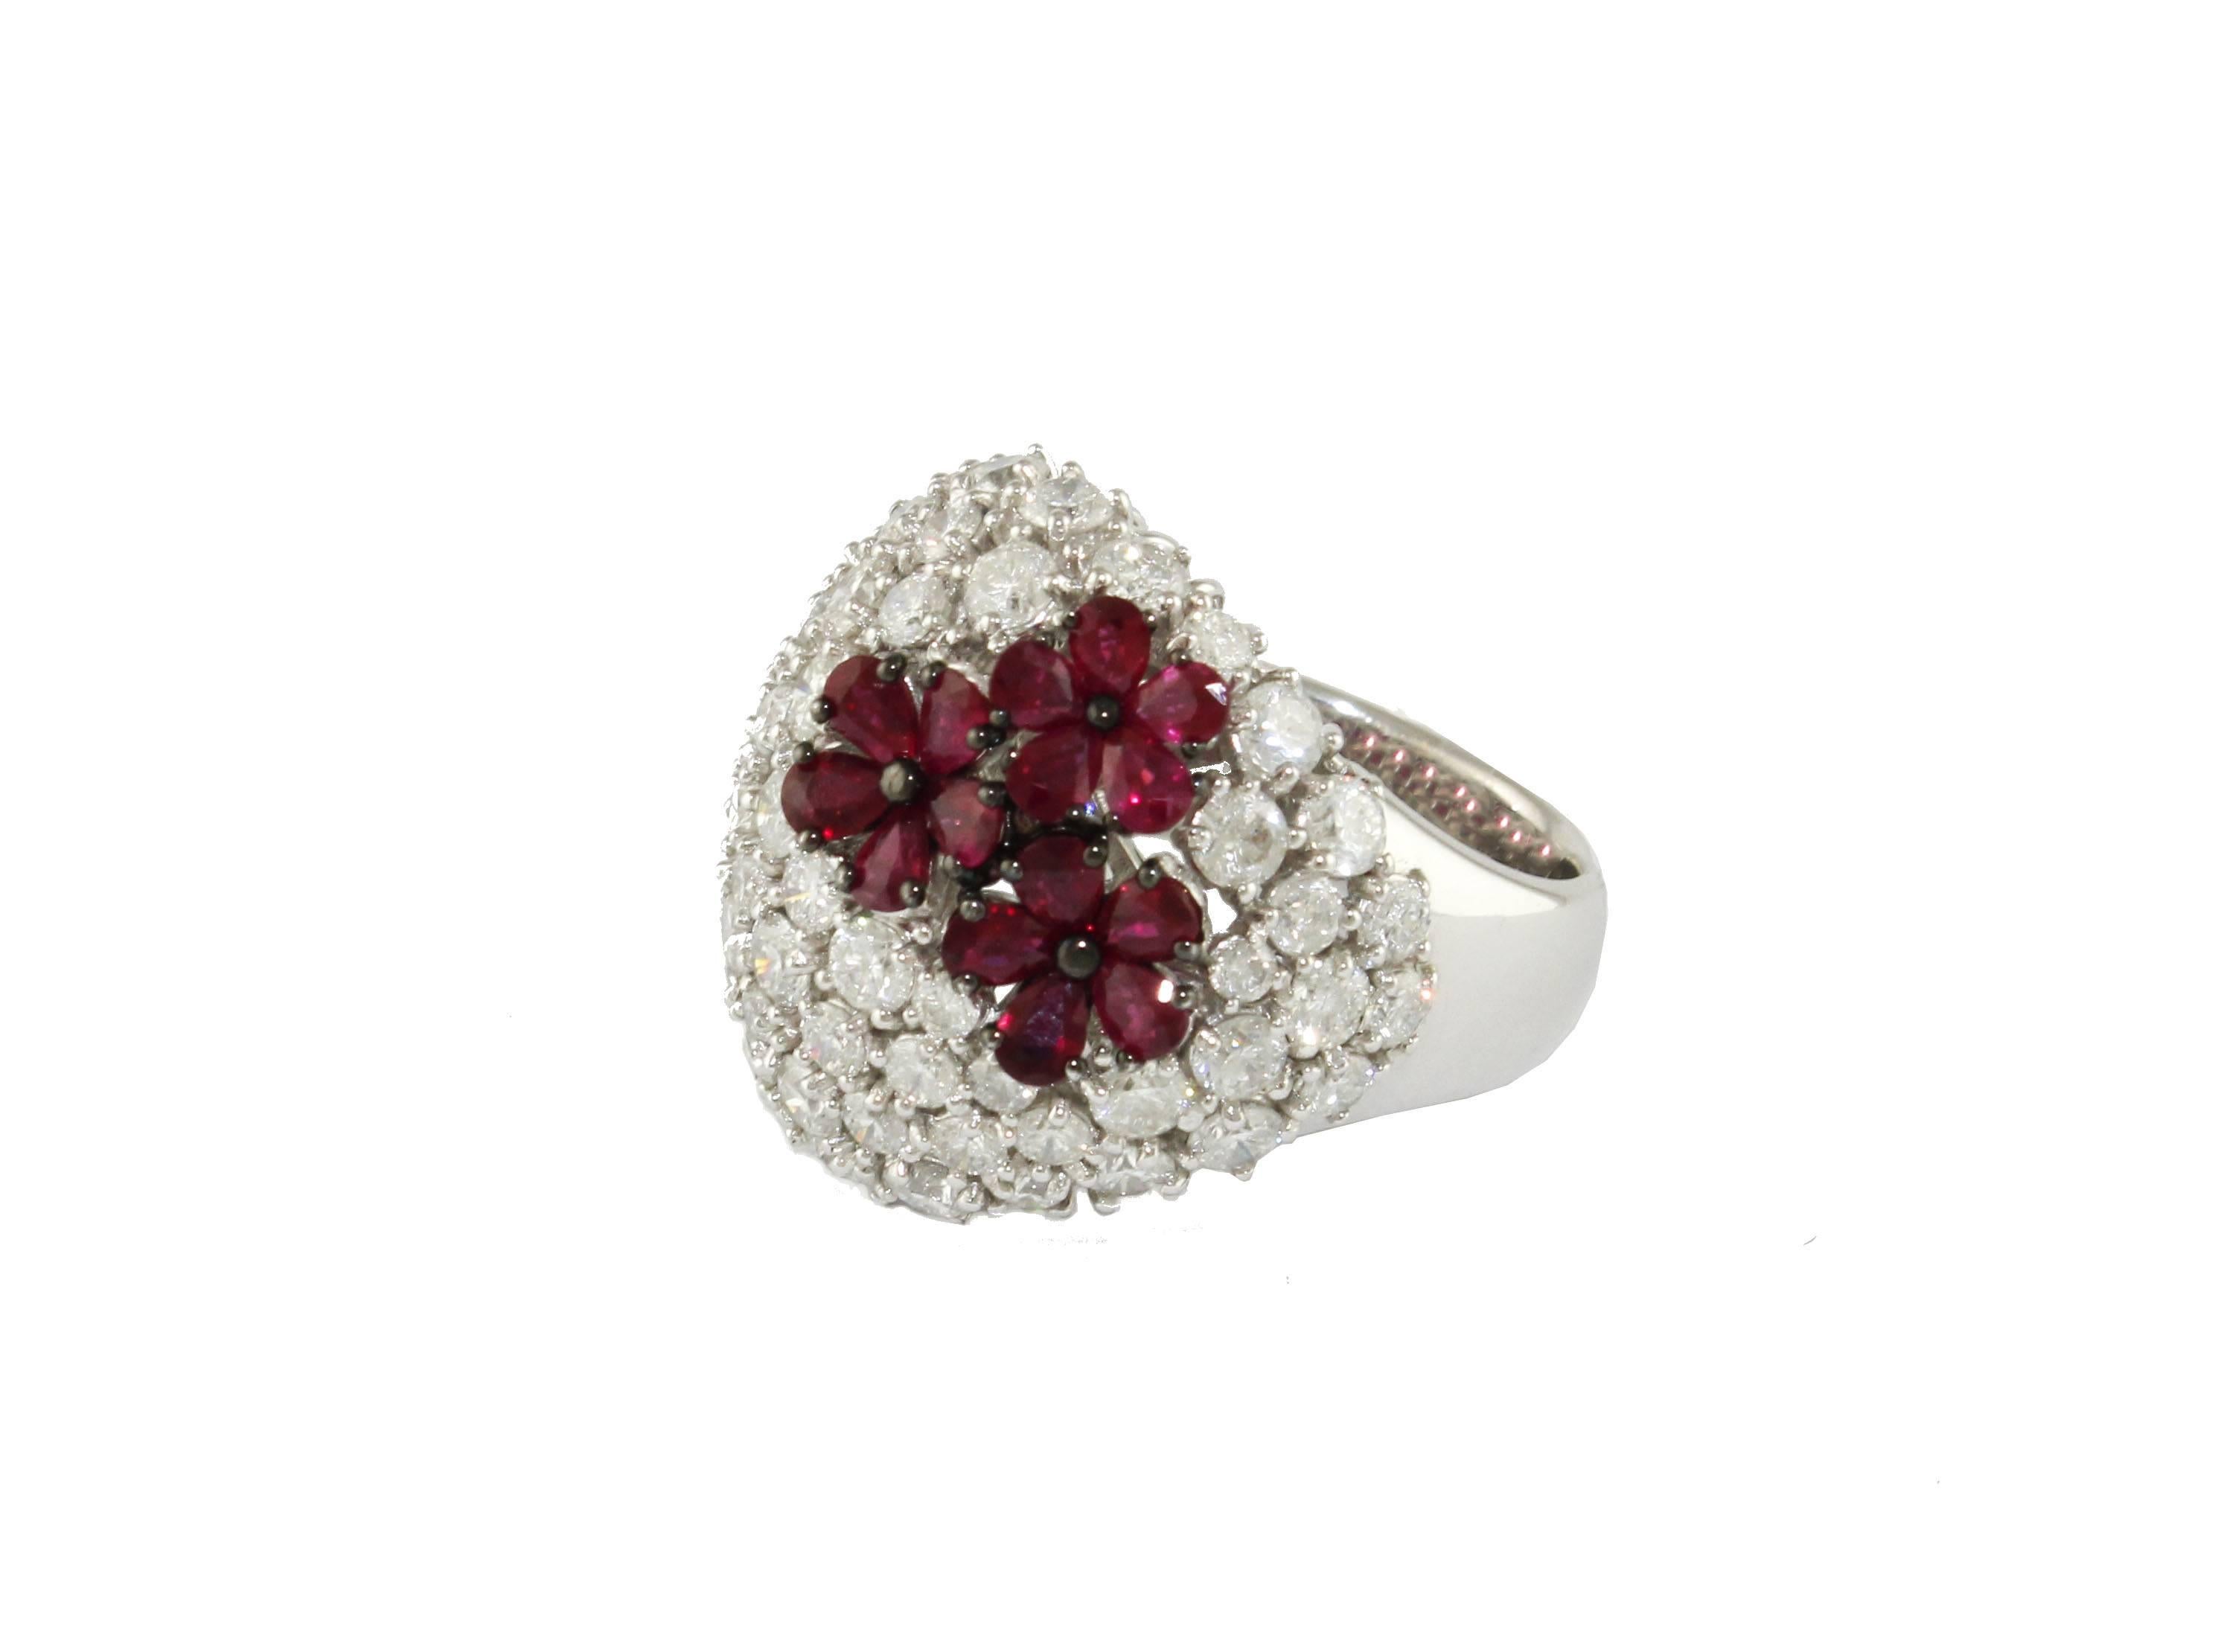 SHIPPING POLICY:
No additional costs will be added to this order.
Shipping costs will be totally covered by the seller (customs duties included).

Precious ring in 18 kt gold, studded with diamonds ct 4.83, with fanstastic small flowers of rubies